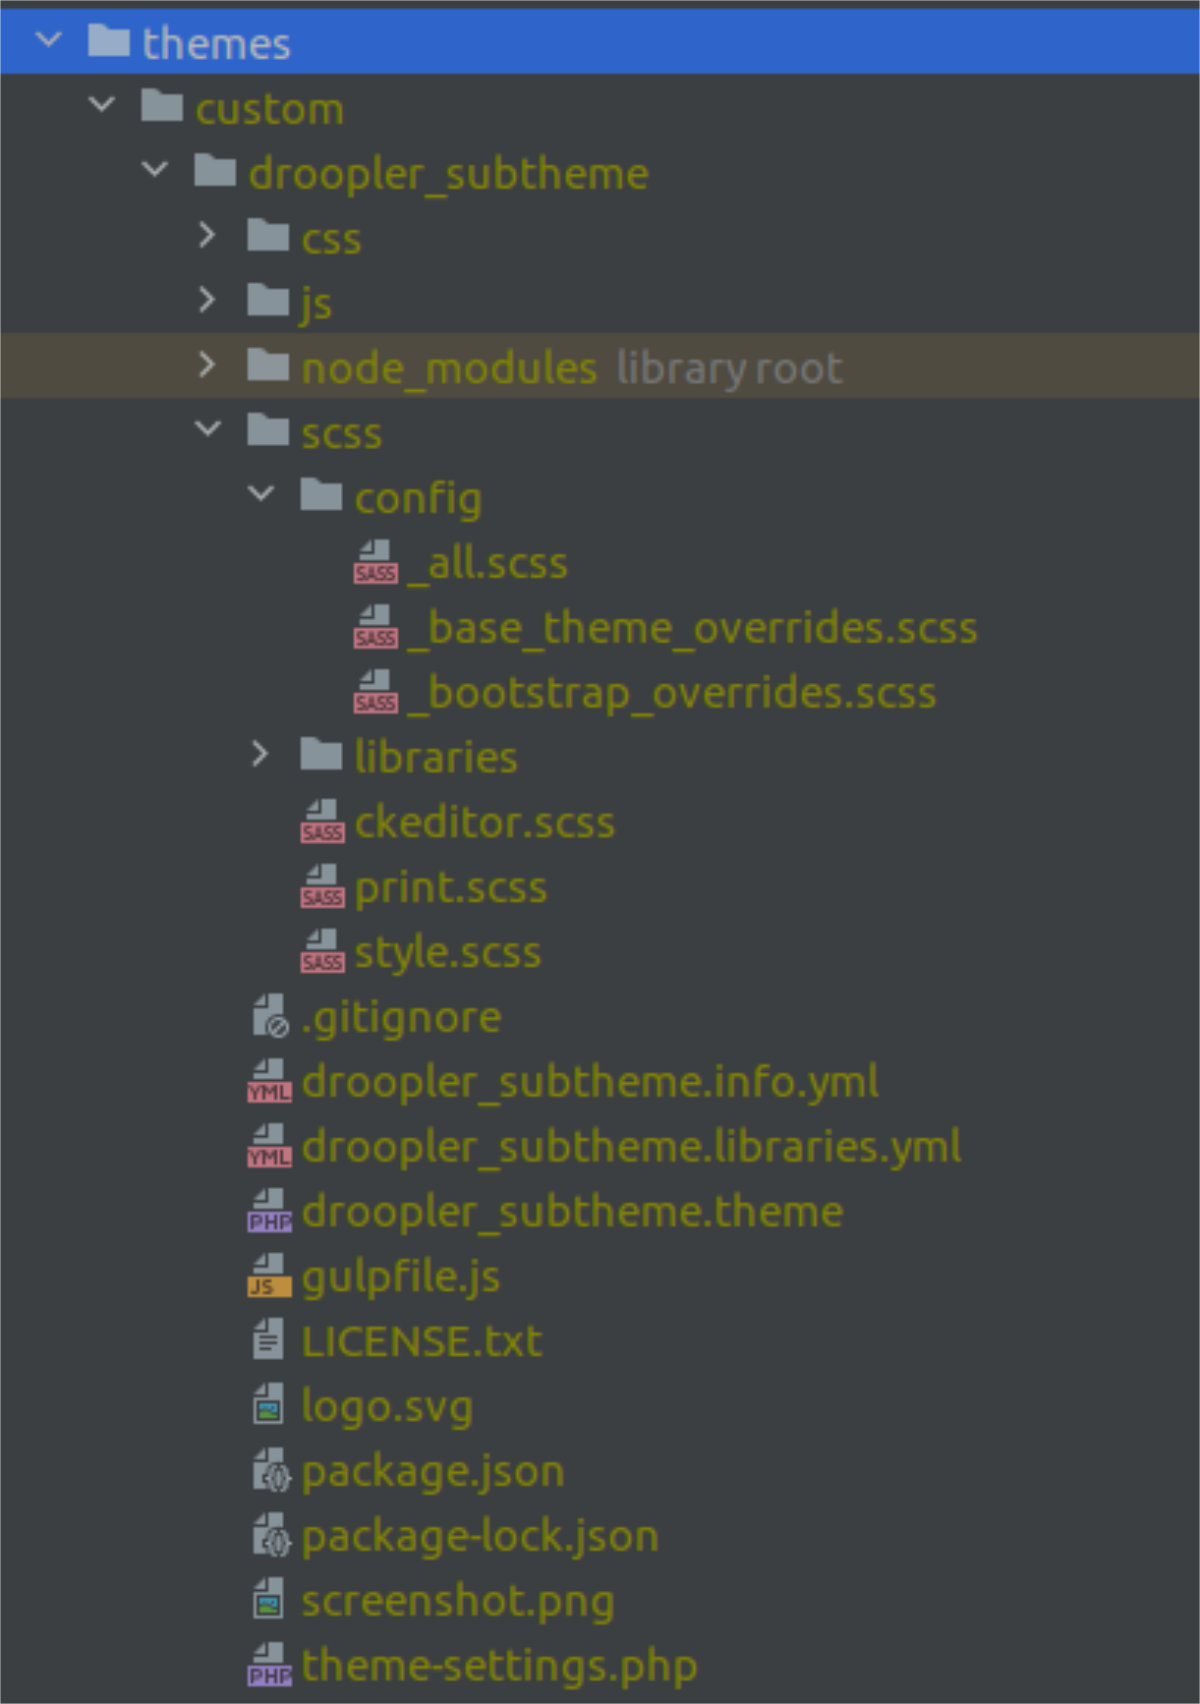 Droopler's sub-theme file structure with _base_theme_overrides.scss and _bootstrap_overrides.scss files